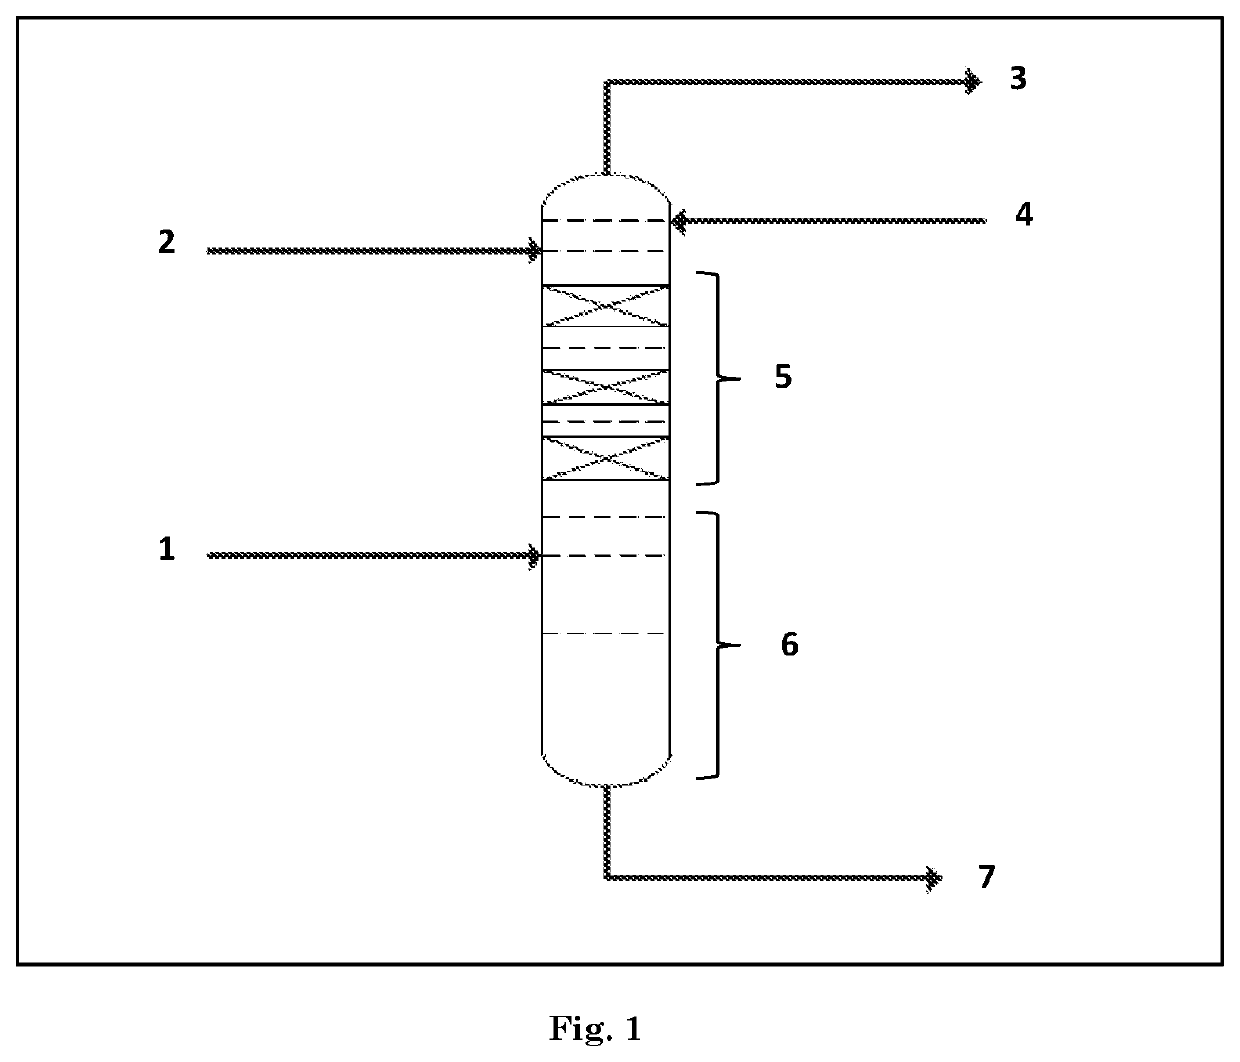 Method for separating non-linear olefins from an olefin feed by reactive distillation